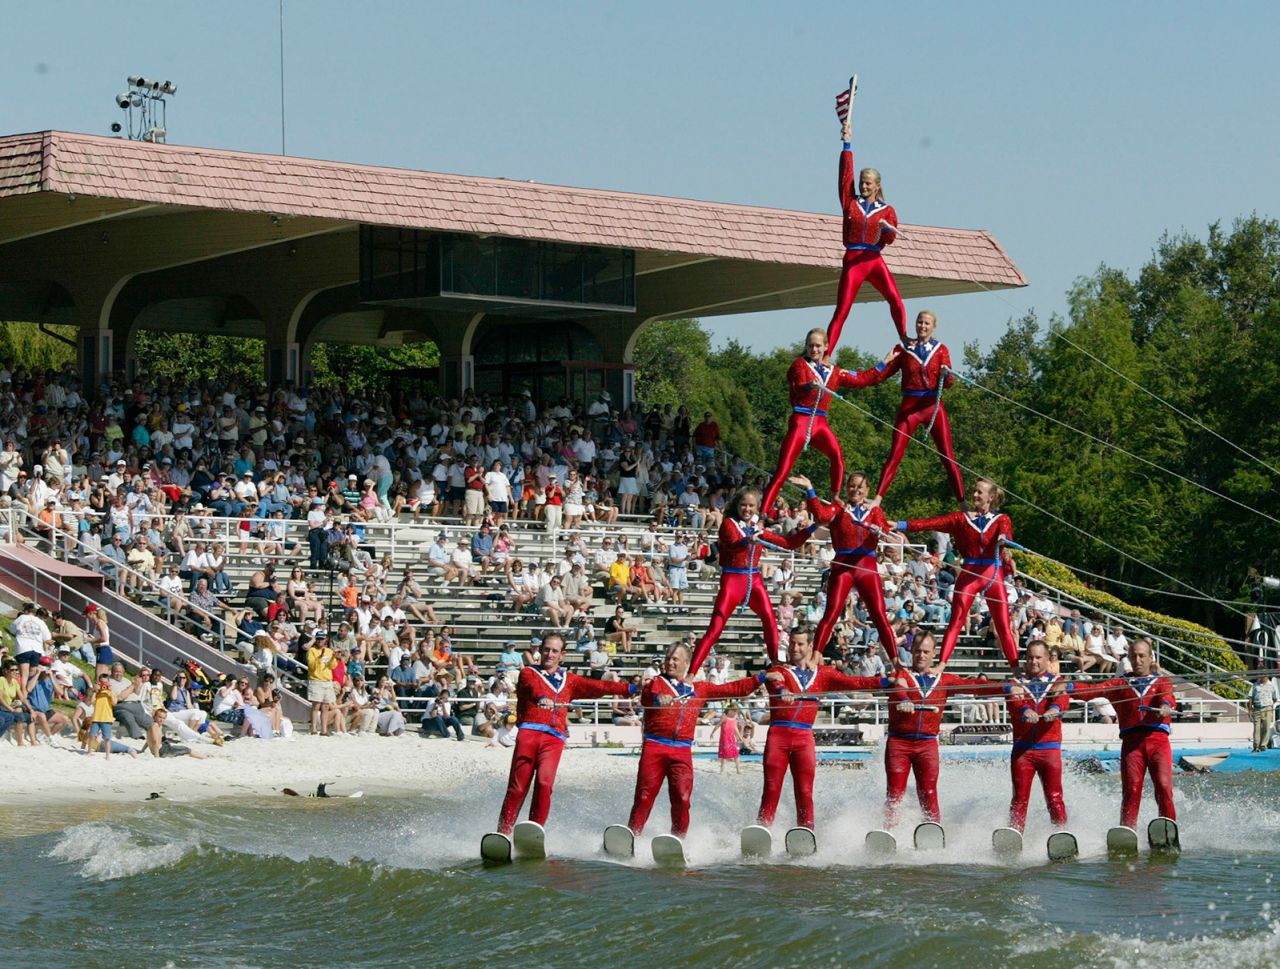 Members of the Cypress Gardens ski show perform a pyramid in 2003.